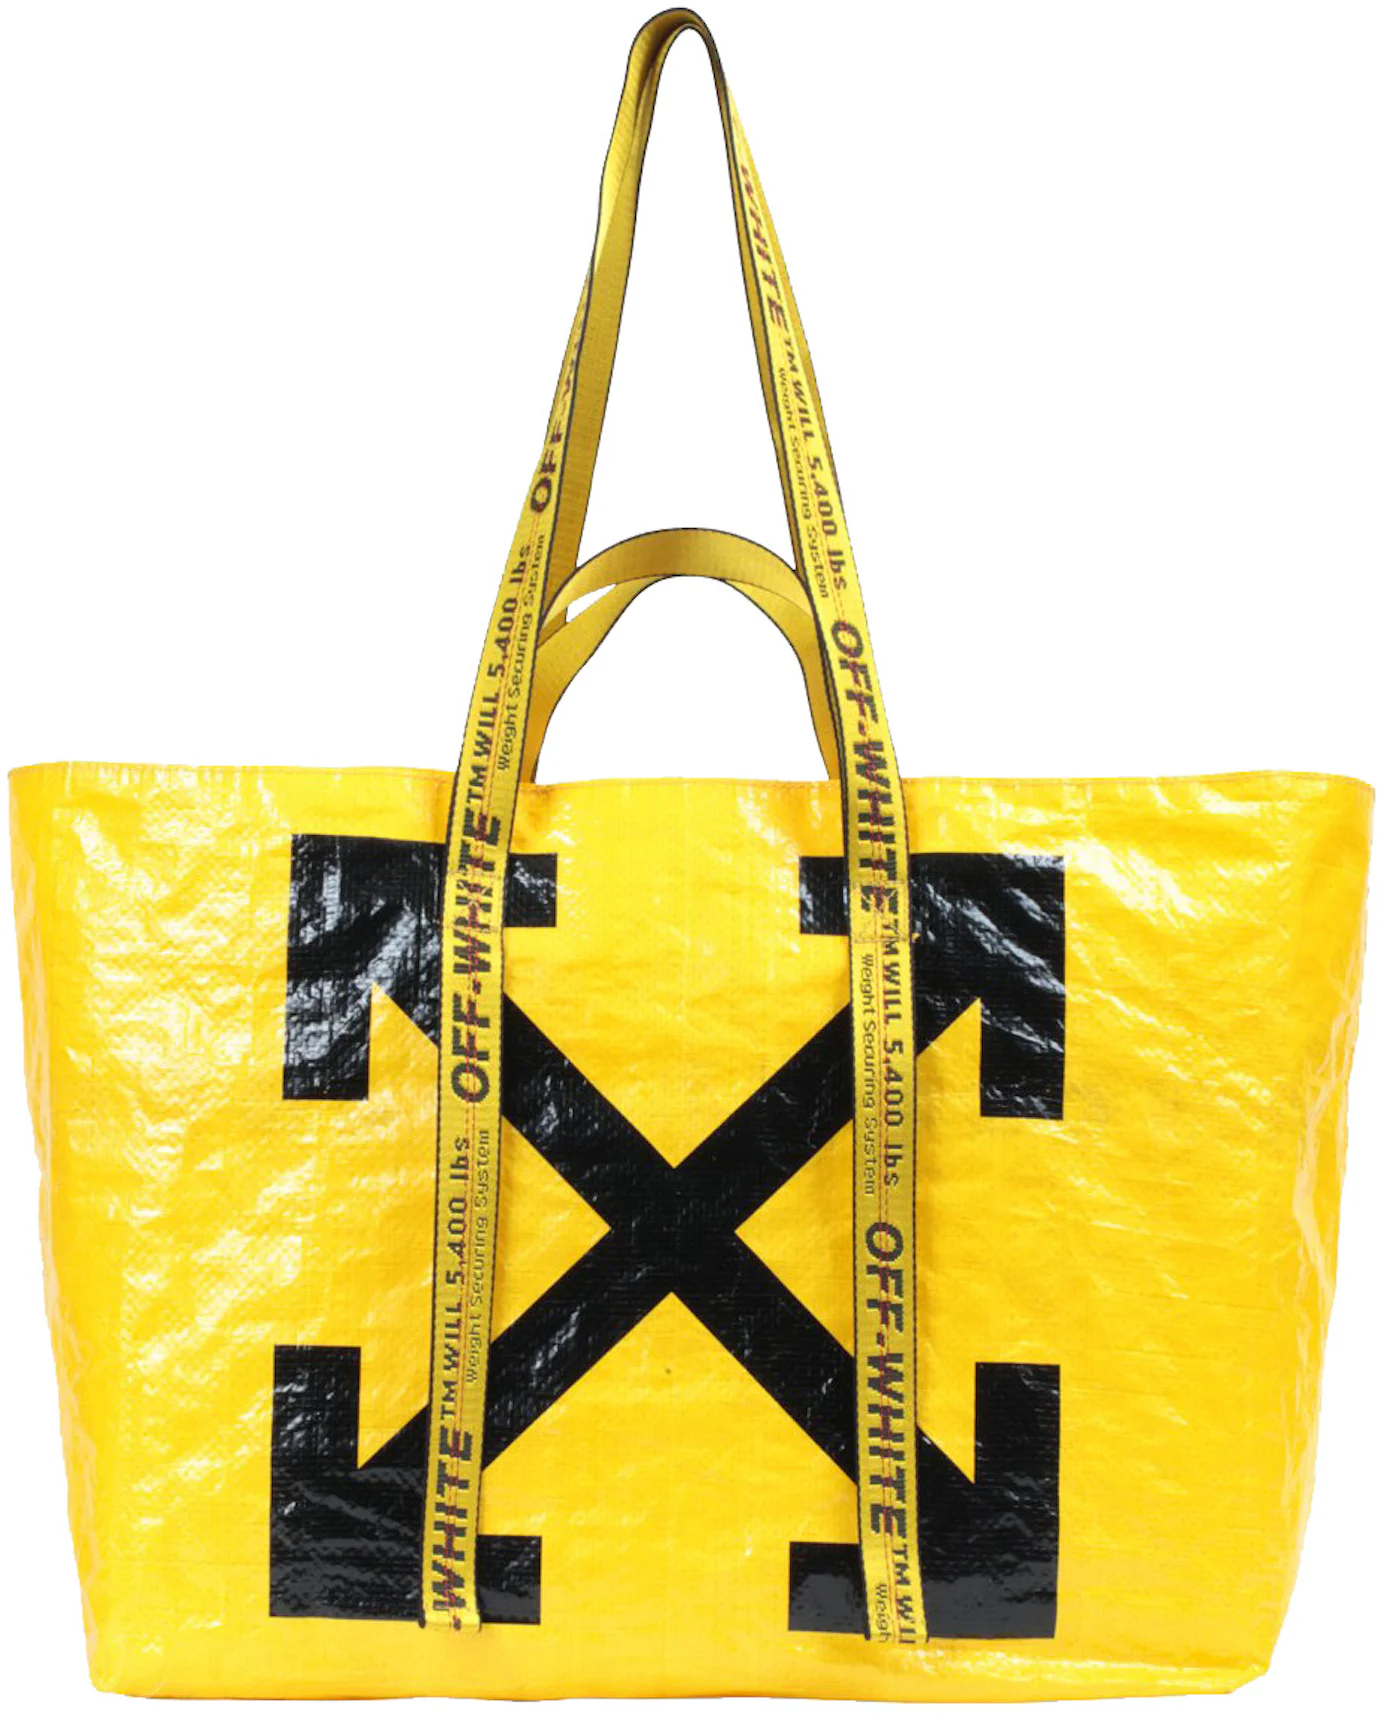 OFF-WHITE Arrows Tote Bag Yellow Black in Polyethylene with Silver-tone